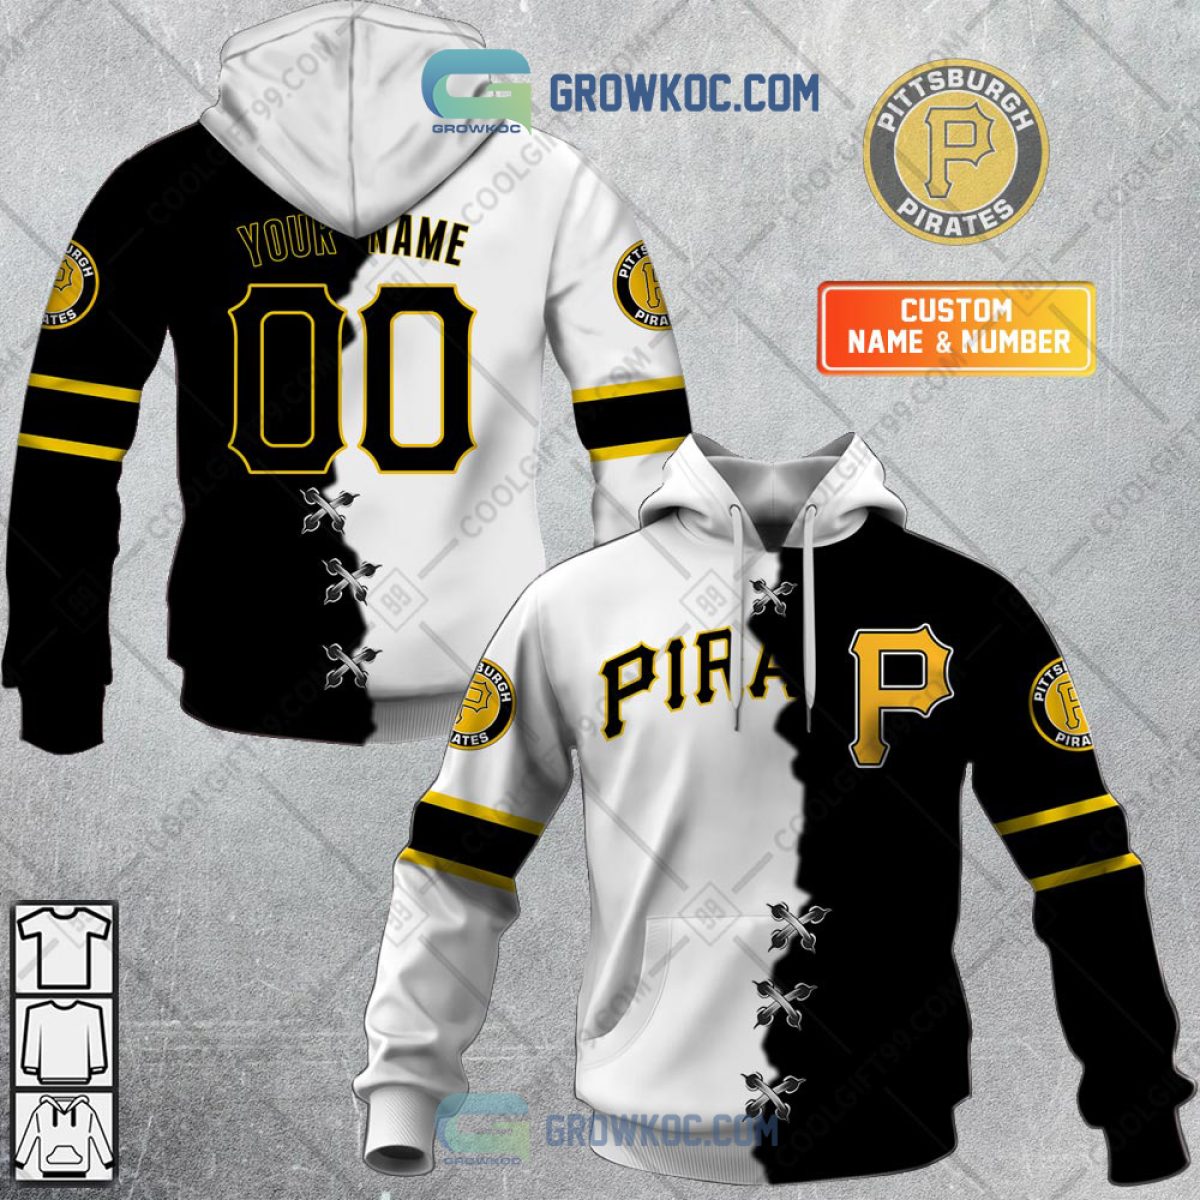 Pittsburgh Pirates Size 3XL MLB Jerseys for sale